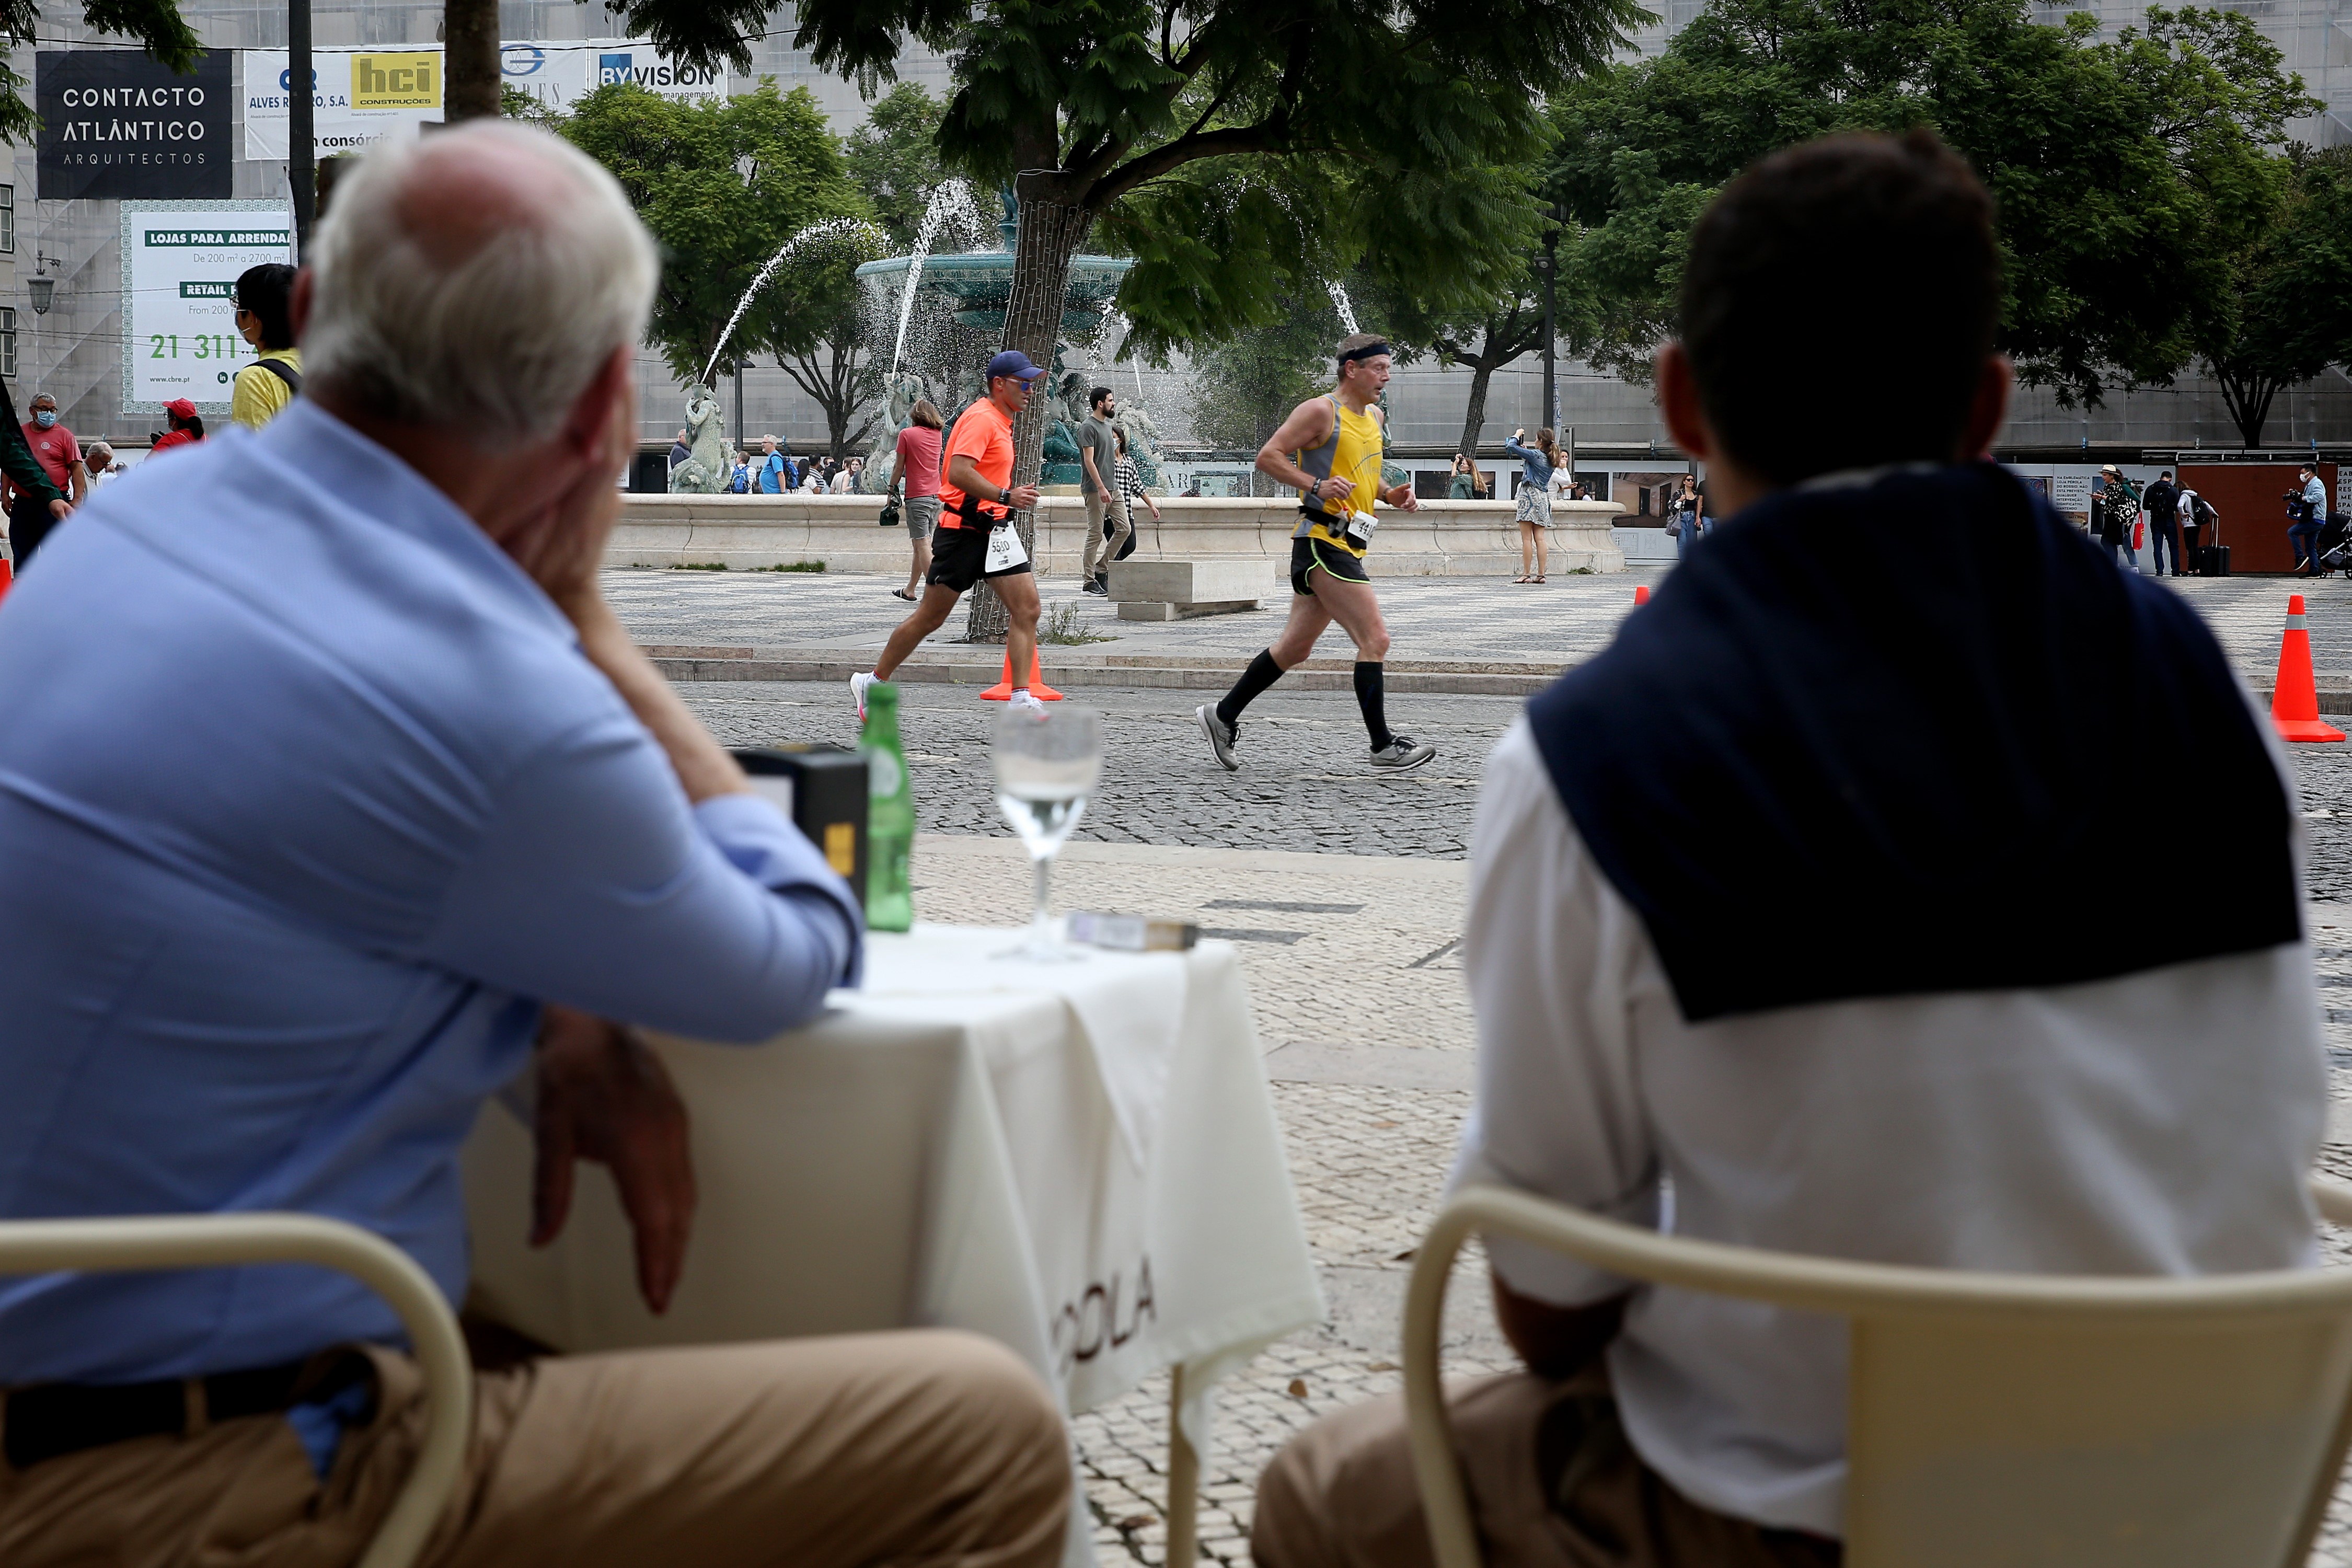 Two men sharing drinks watch runners race down cobblestoned streets in Lisbon, Portugal.